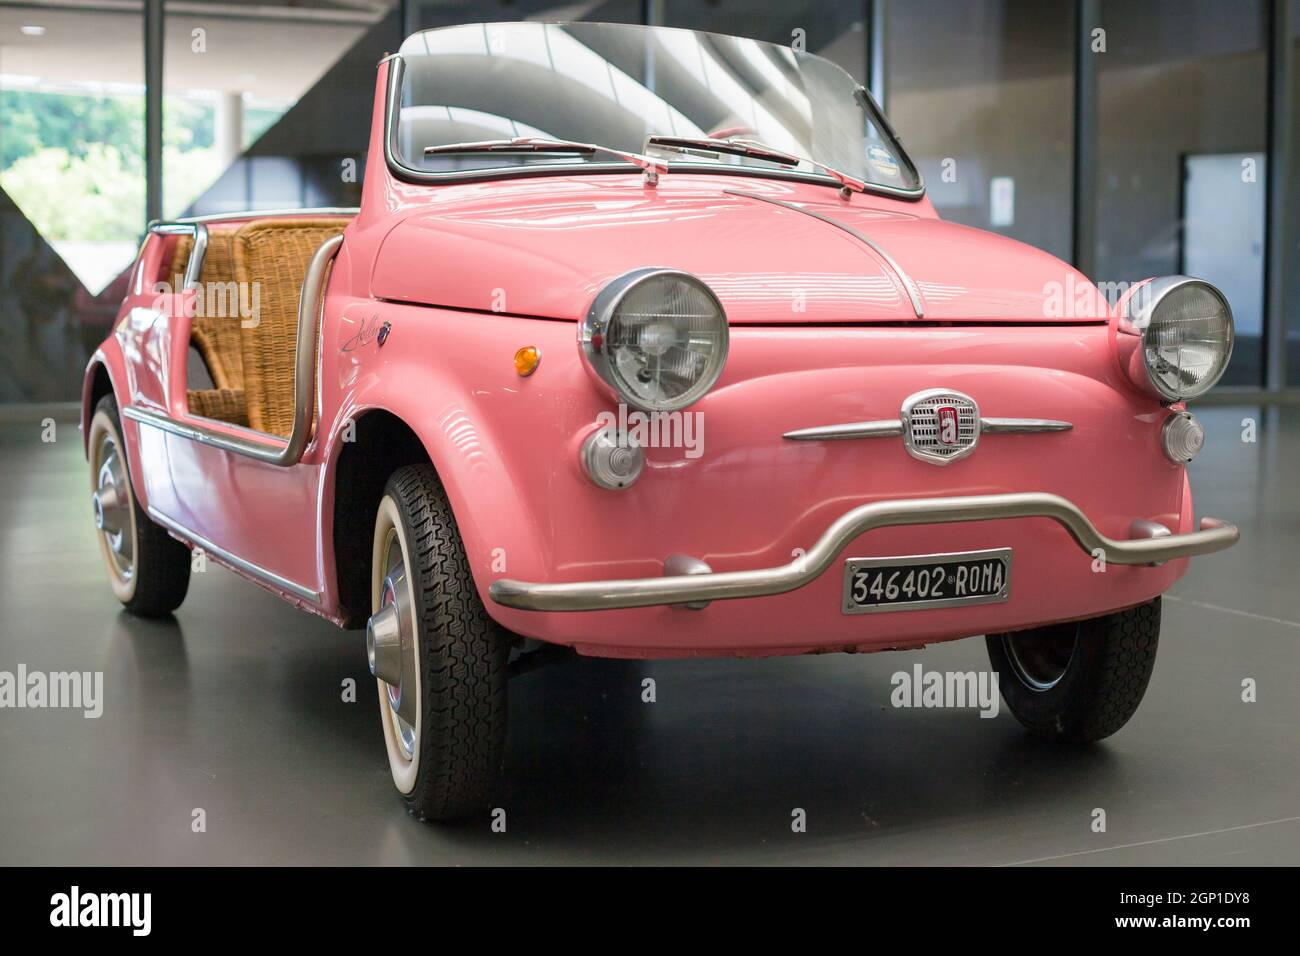 Torino, Italy - August 13, 2021: Fiat 500 Jolly showcased at the National Automobile Museum (MAUTO) in Torino, Italy. Stock Photo